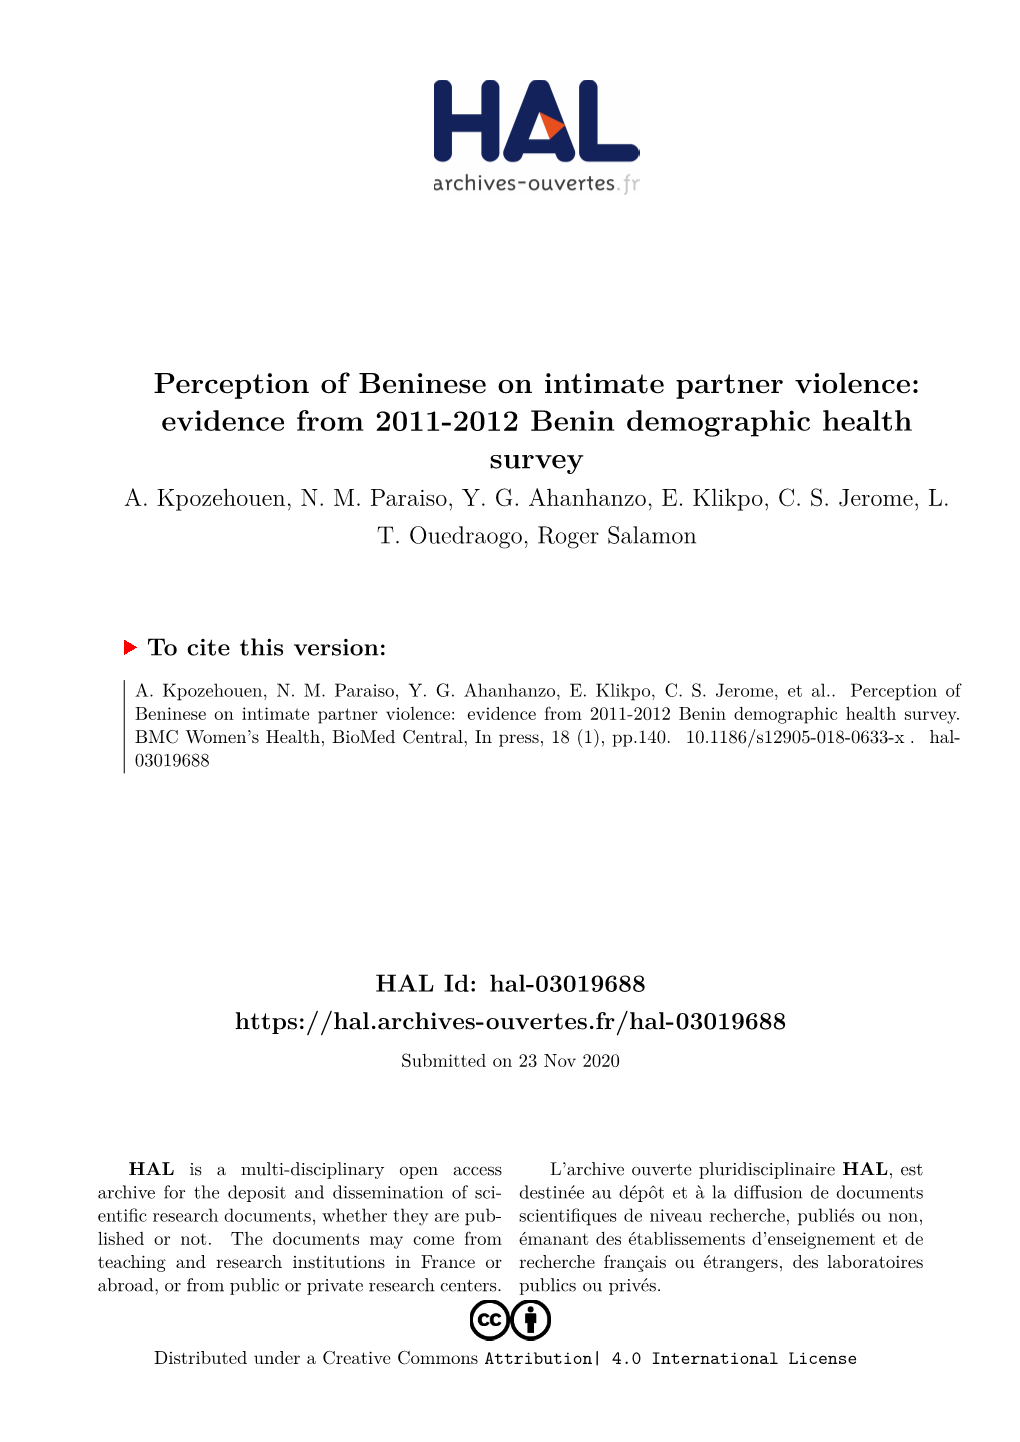 Perception of Beninese on Intimate Partner Violence: Evidence from 2011-2012 Benin Demographic Health Survey A